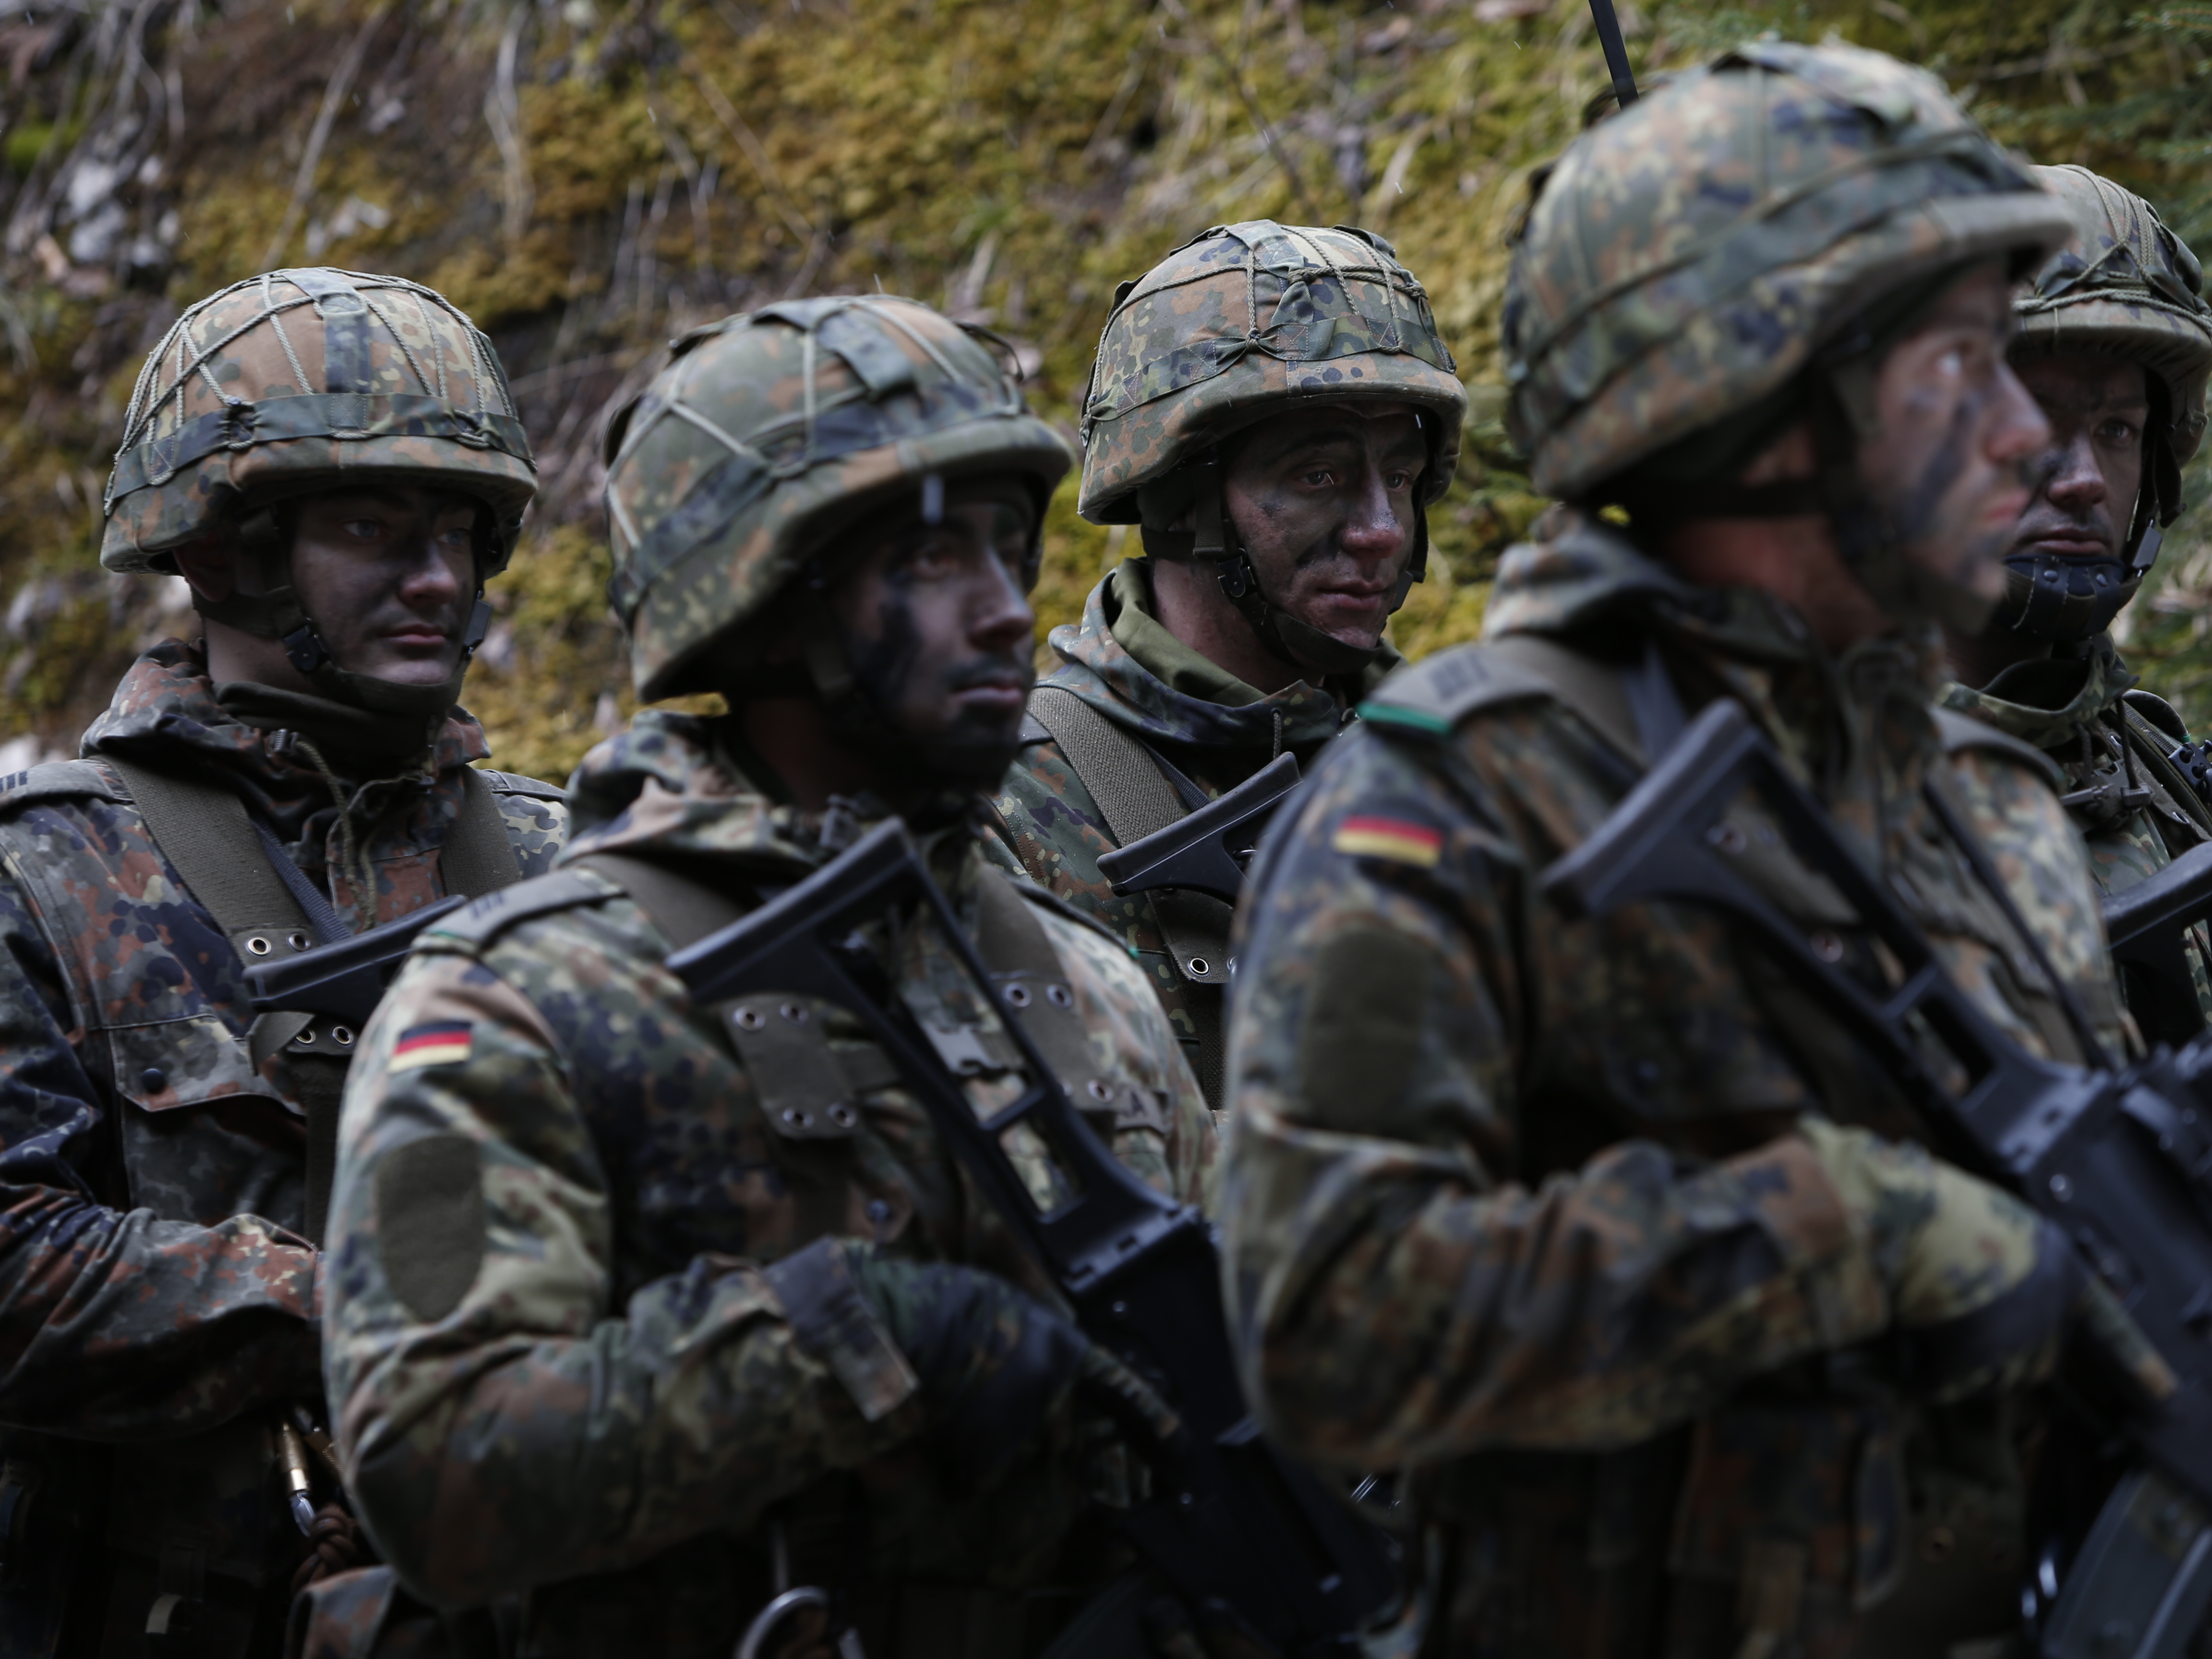 German military eyes recruitment bump from reality show despite ...